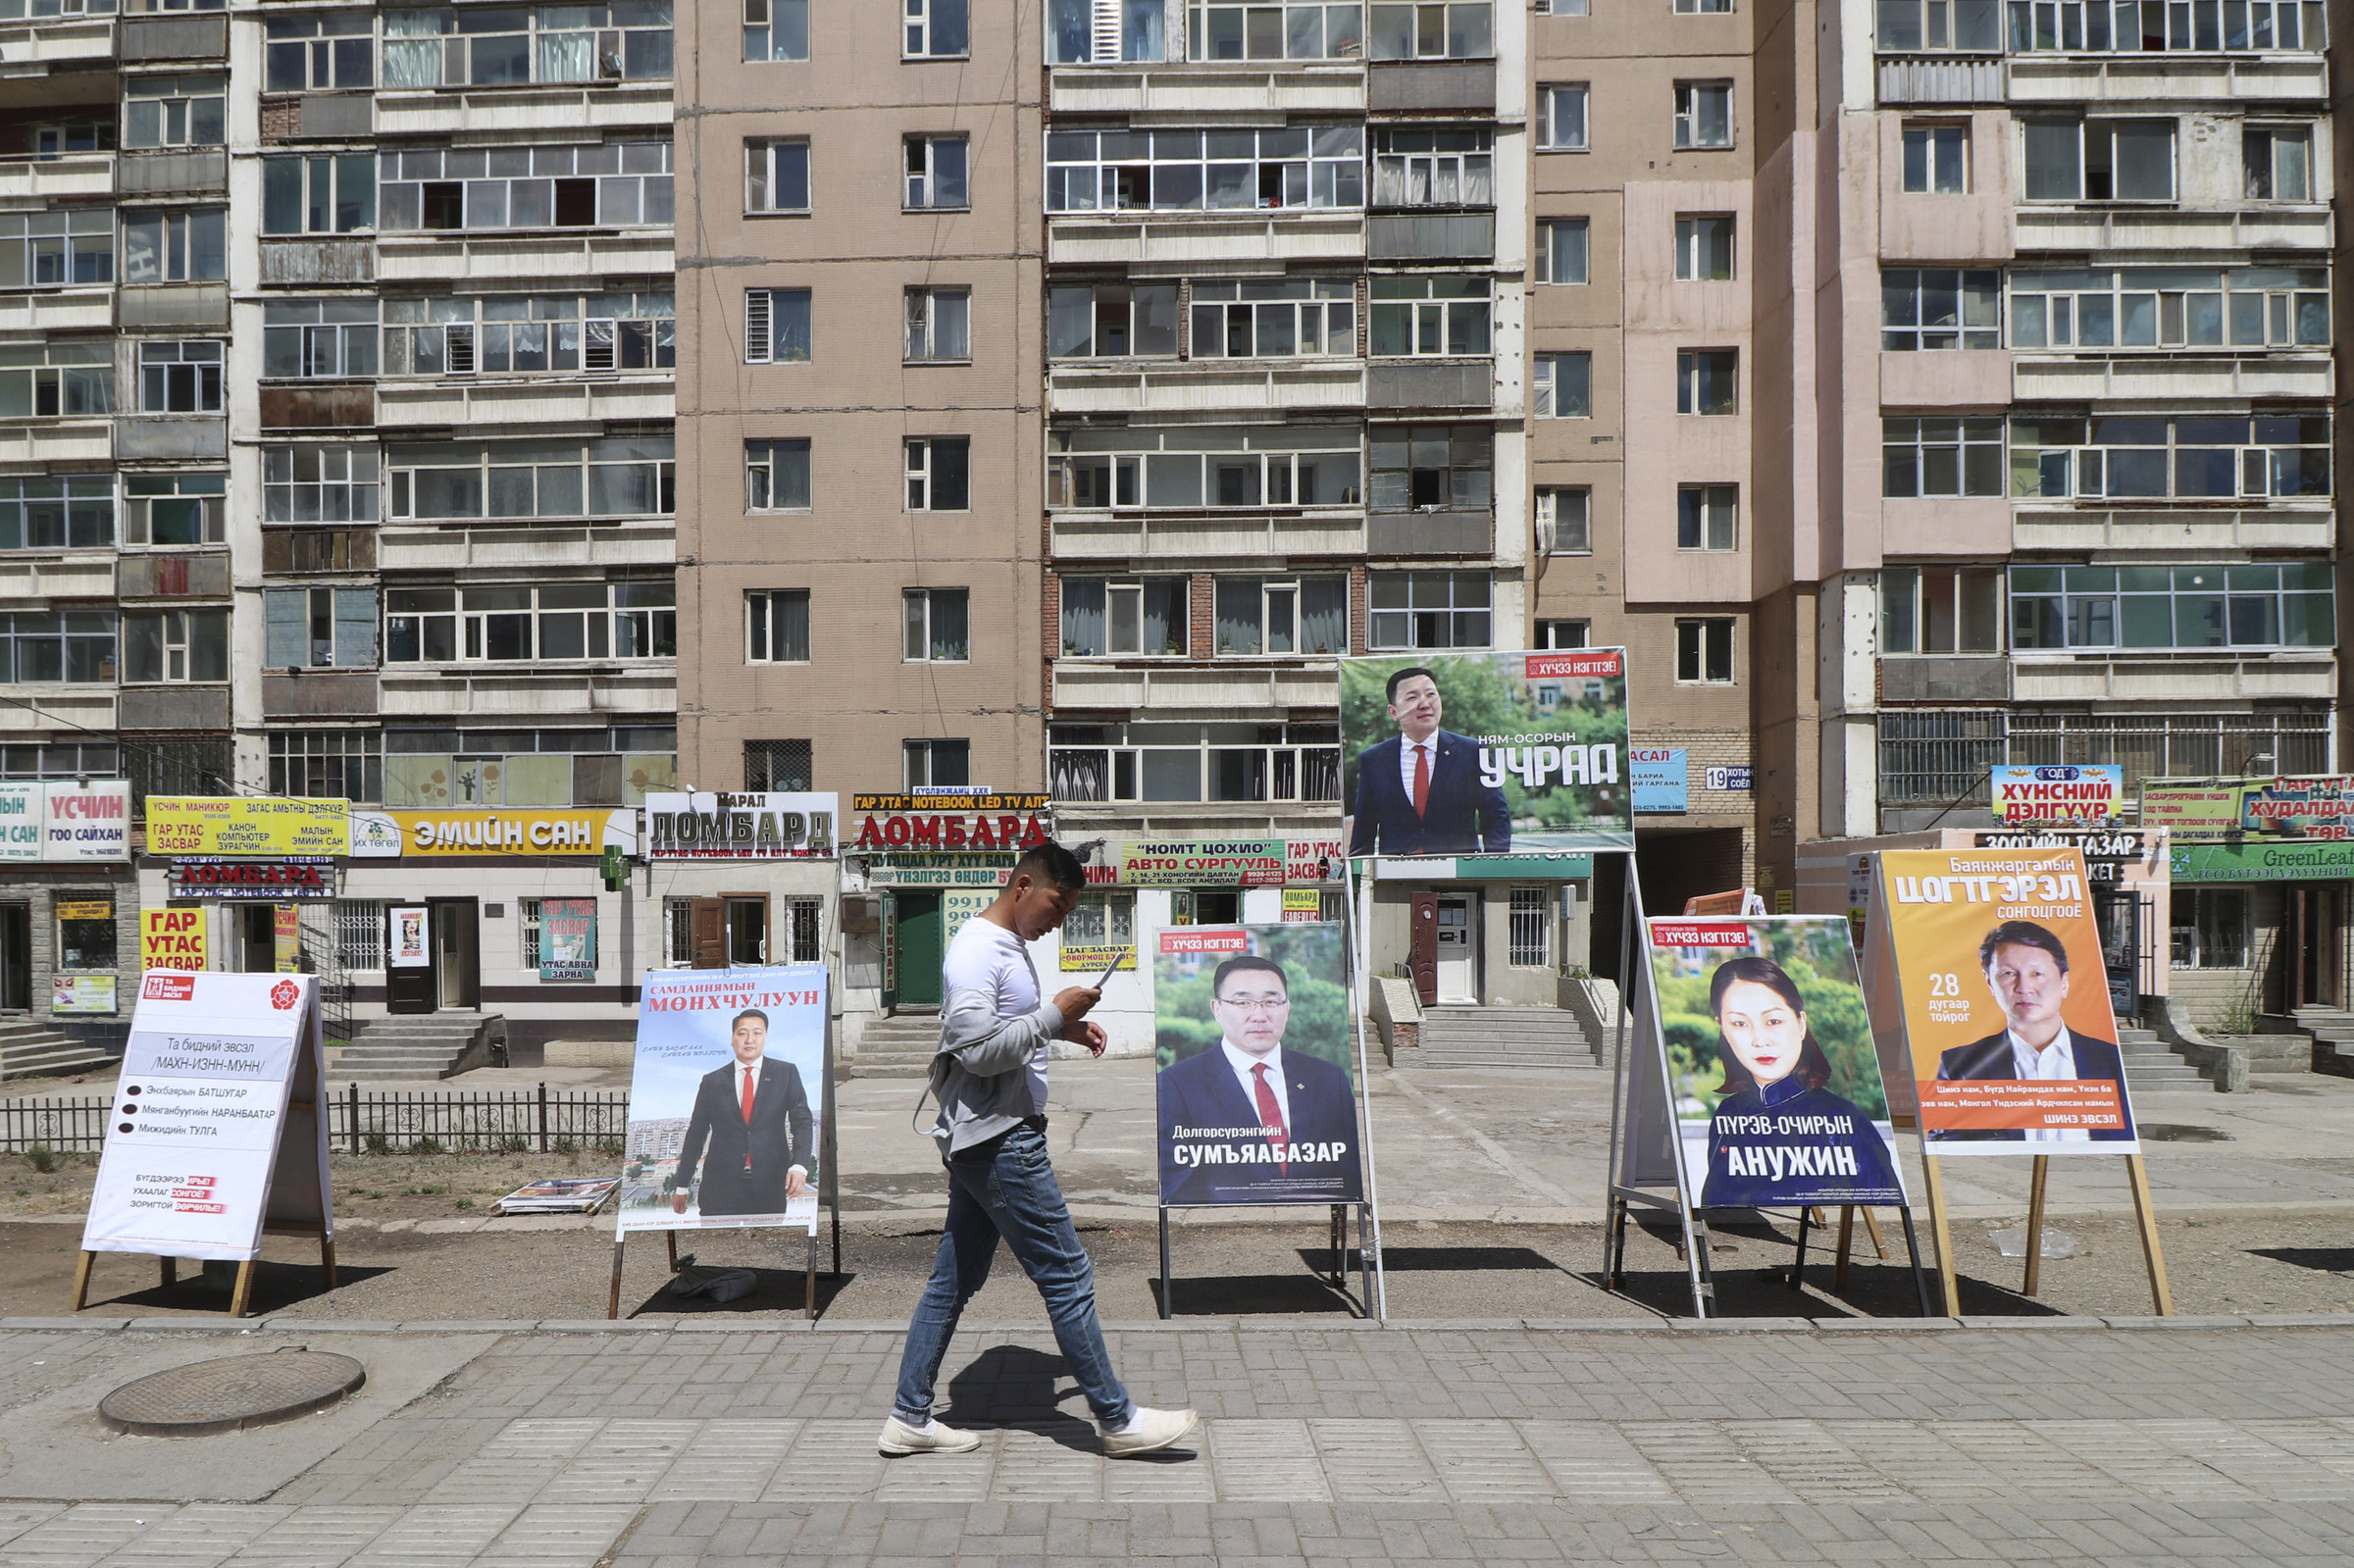 A man walks past election stands of various parties including ruling Mongolian People's Party and independent candidates in the Songinokhairkhan district on the outskirts of Ulaanbaatar, Mongolia, Monday, June 22, 2020. Mongolia holds parliamentary elections on Wednesday, continuing a nearly 30-year democratic system in a vast but lightly populated country sandwiched between authoritarian regimes in Russia and China and beset by economic problems. (AP Photo/Ganbat Namjilsangarav)